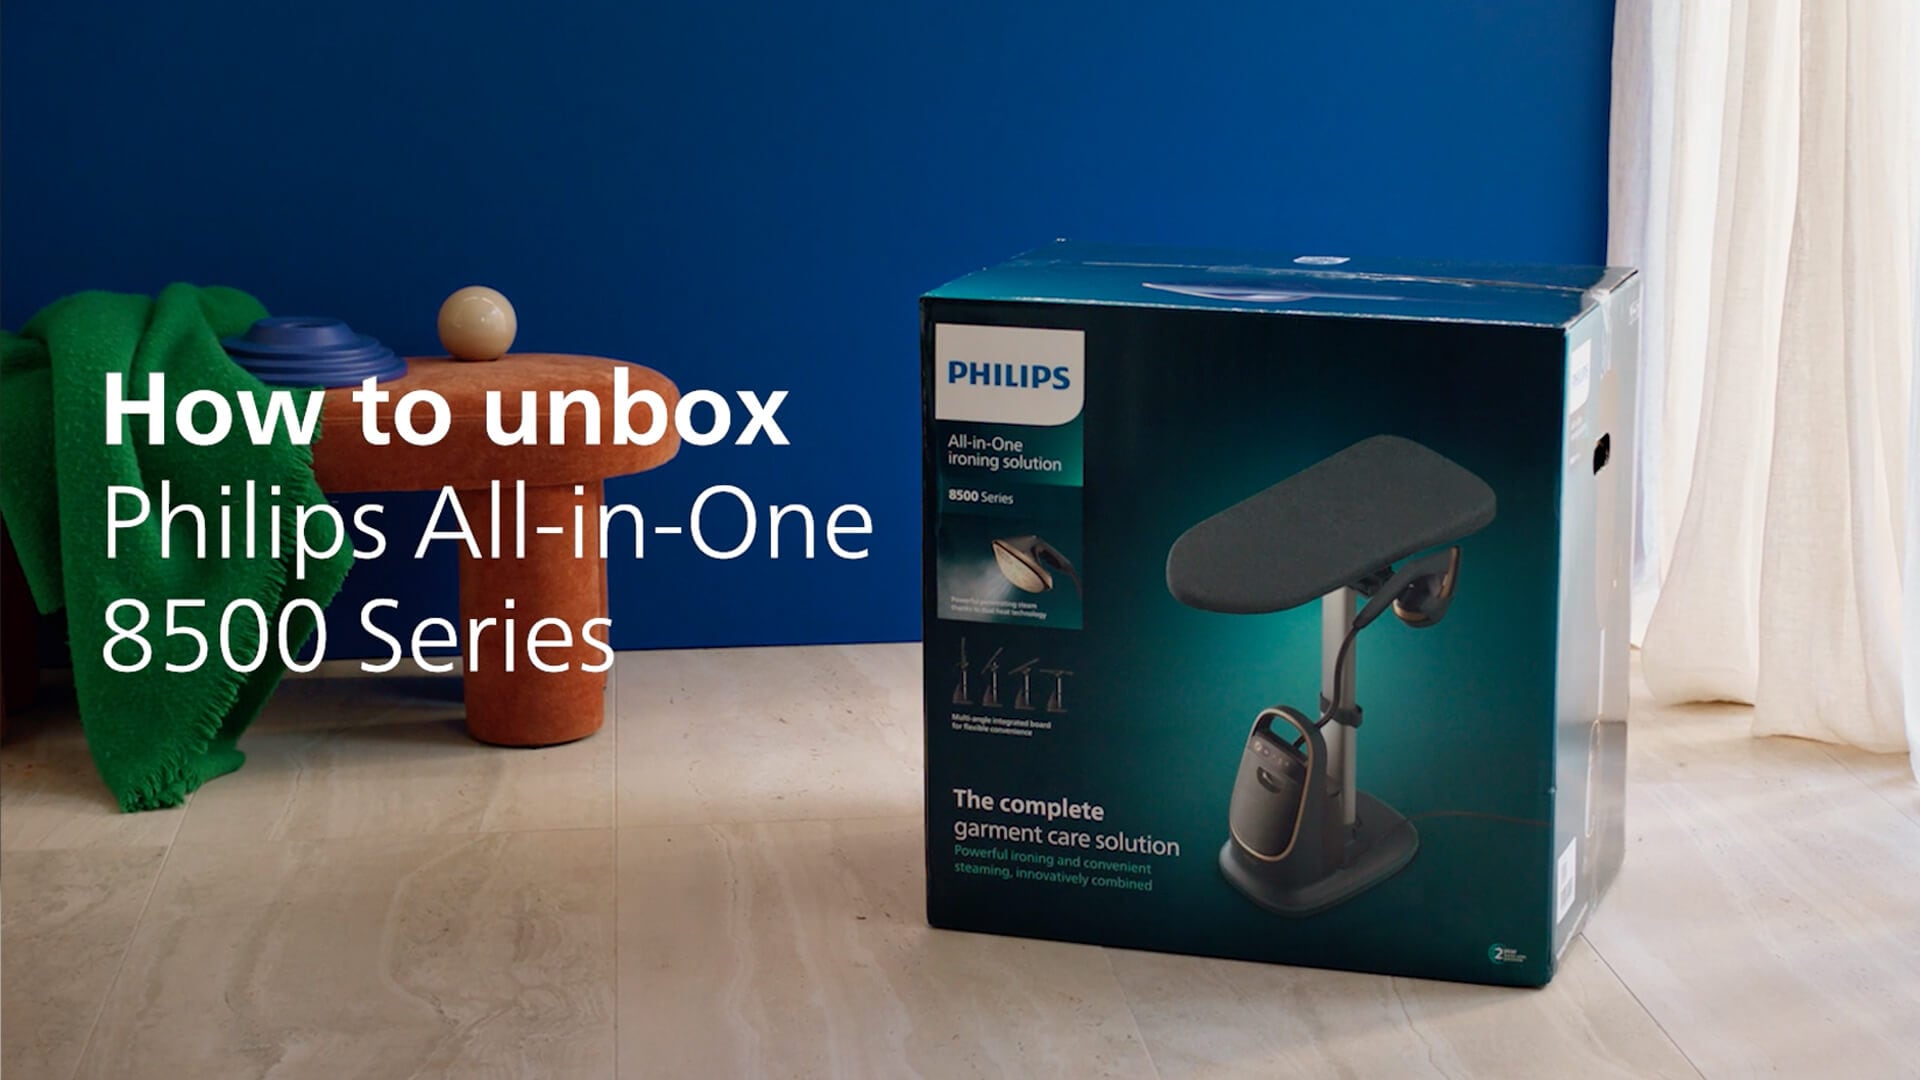 Watch how to unbox Philips All-in-One 8500 Series